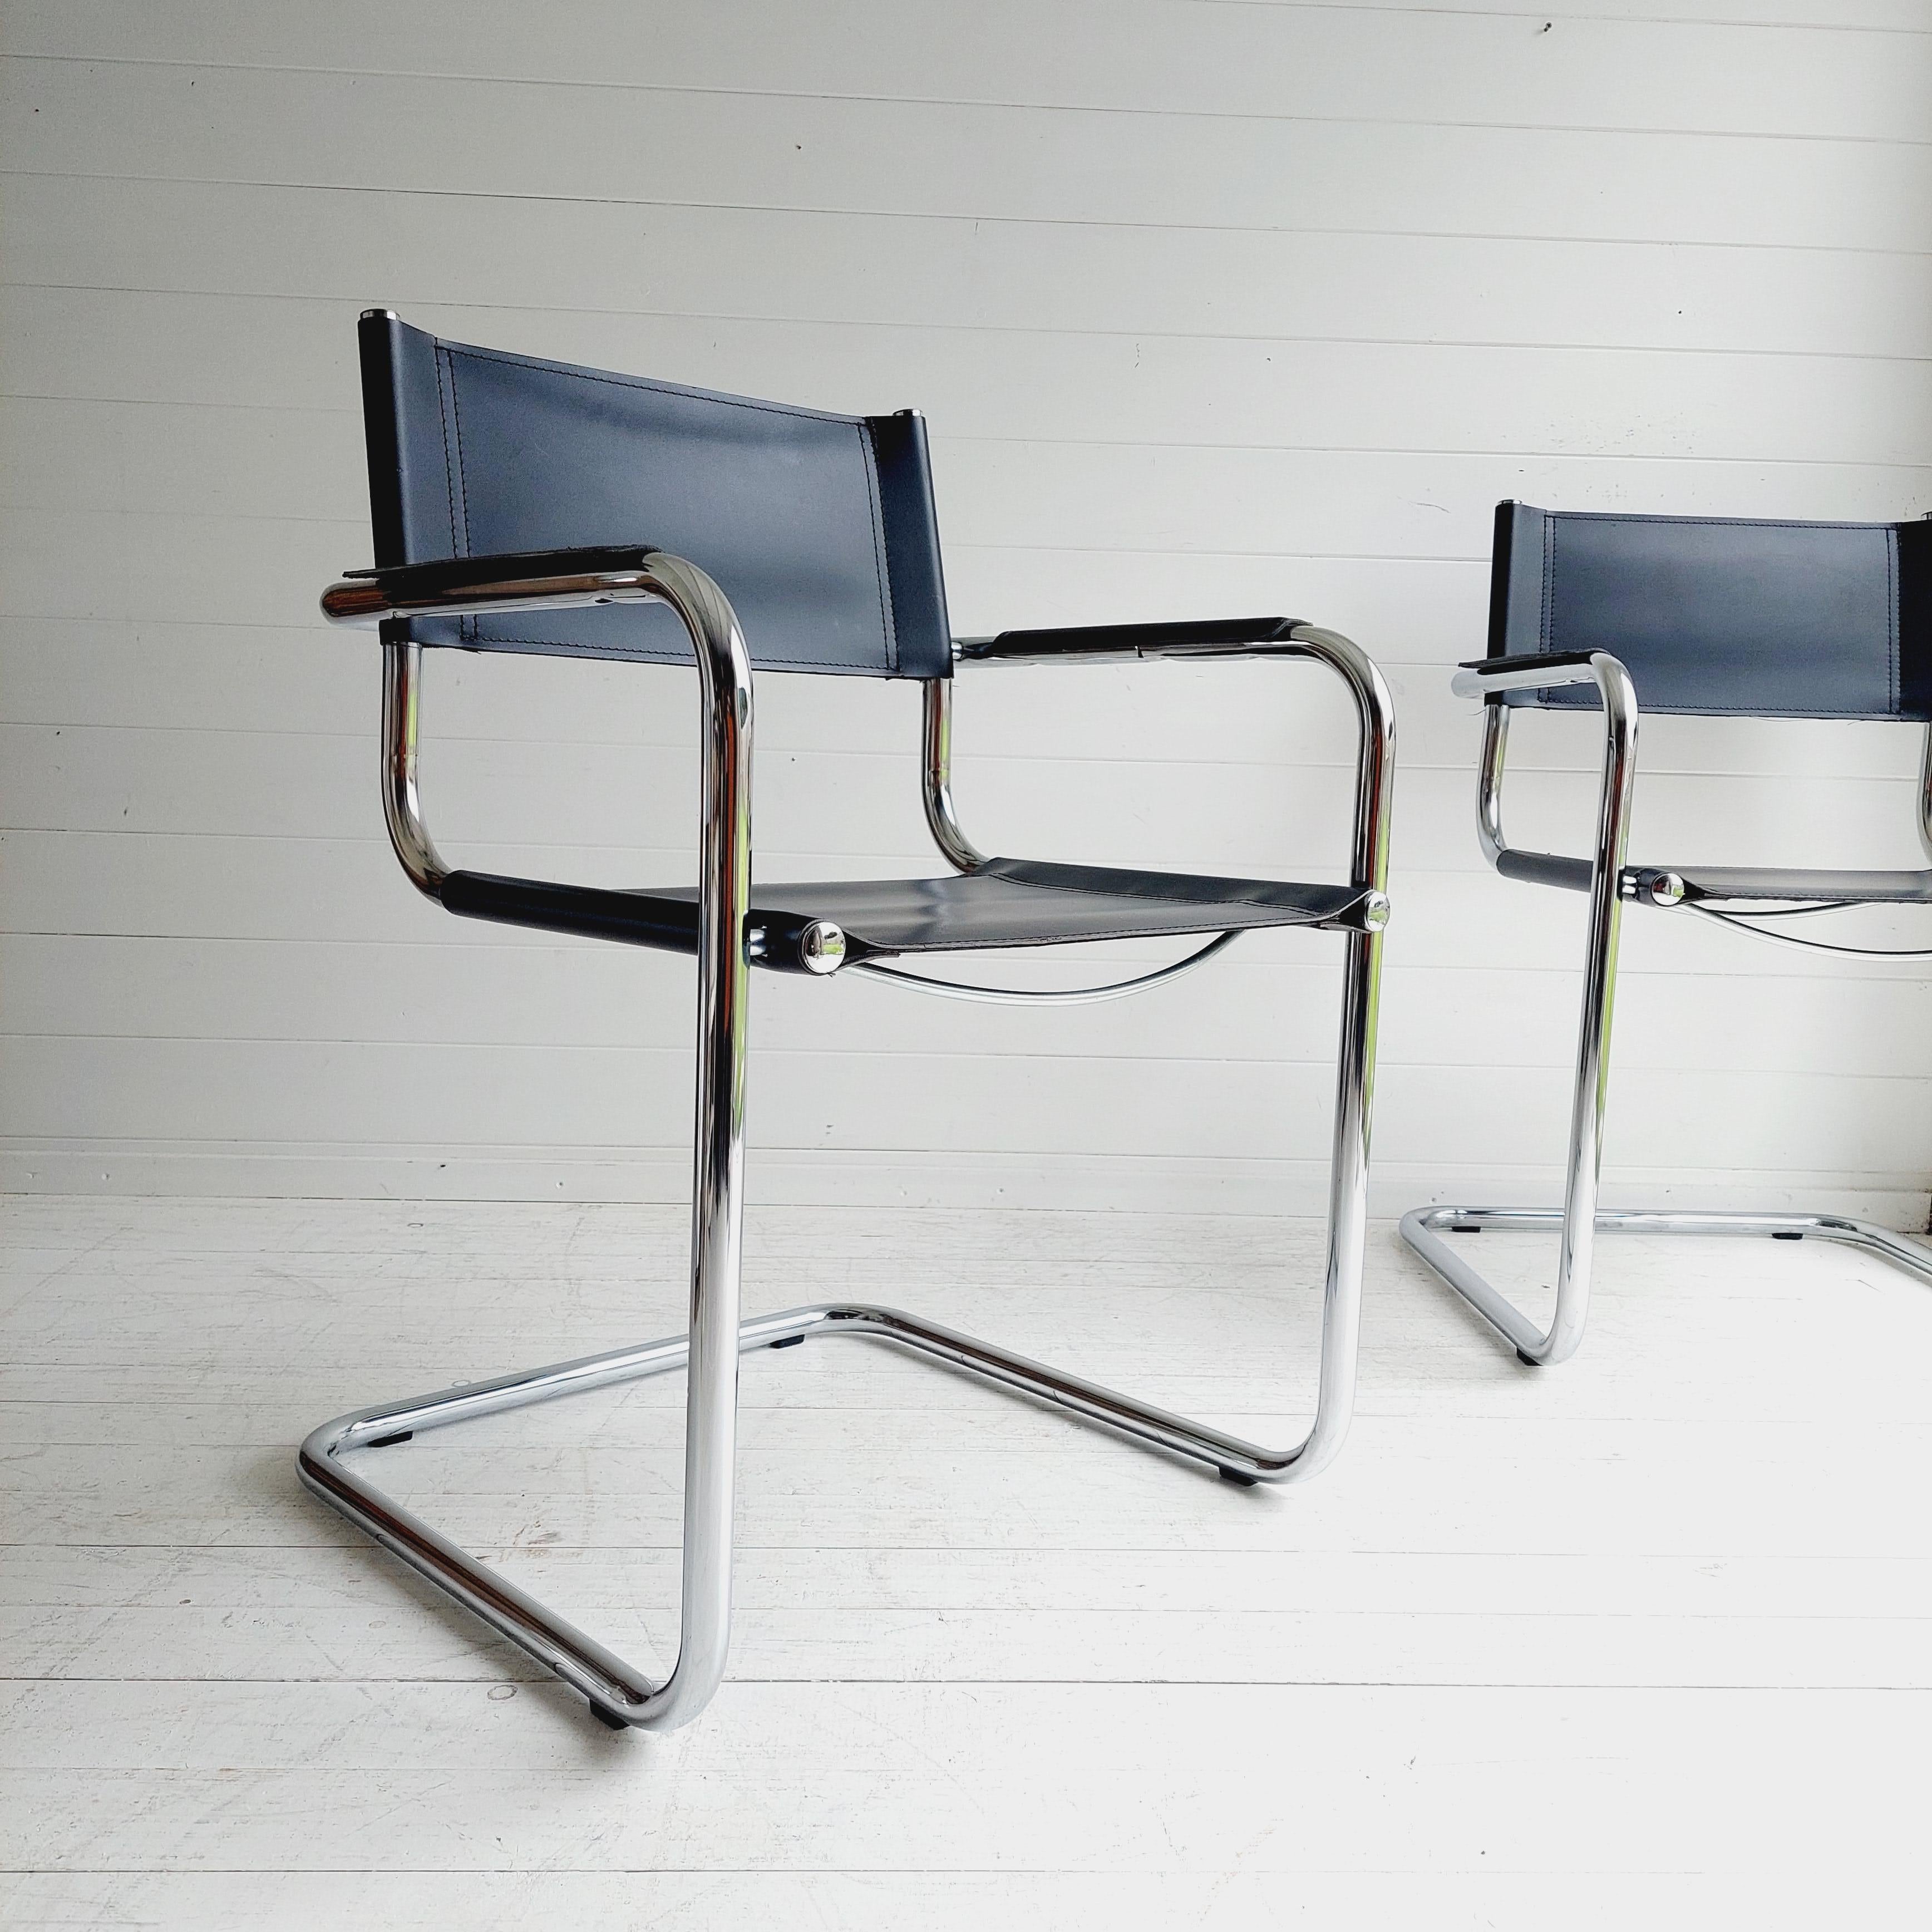 Vintage Mid Century 1960's/70's Mart Stam Style Cantilever Dining Chairs
Mart Stam Model S34 Leather Cantilever Style Chairs
The armchair is a beautiful mid-century furniture of the Bauhaus era.
Designed by Mart Stam in the 1920s

Feature tubular